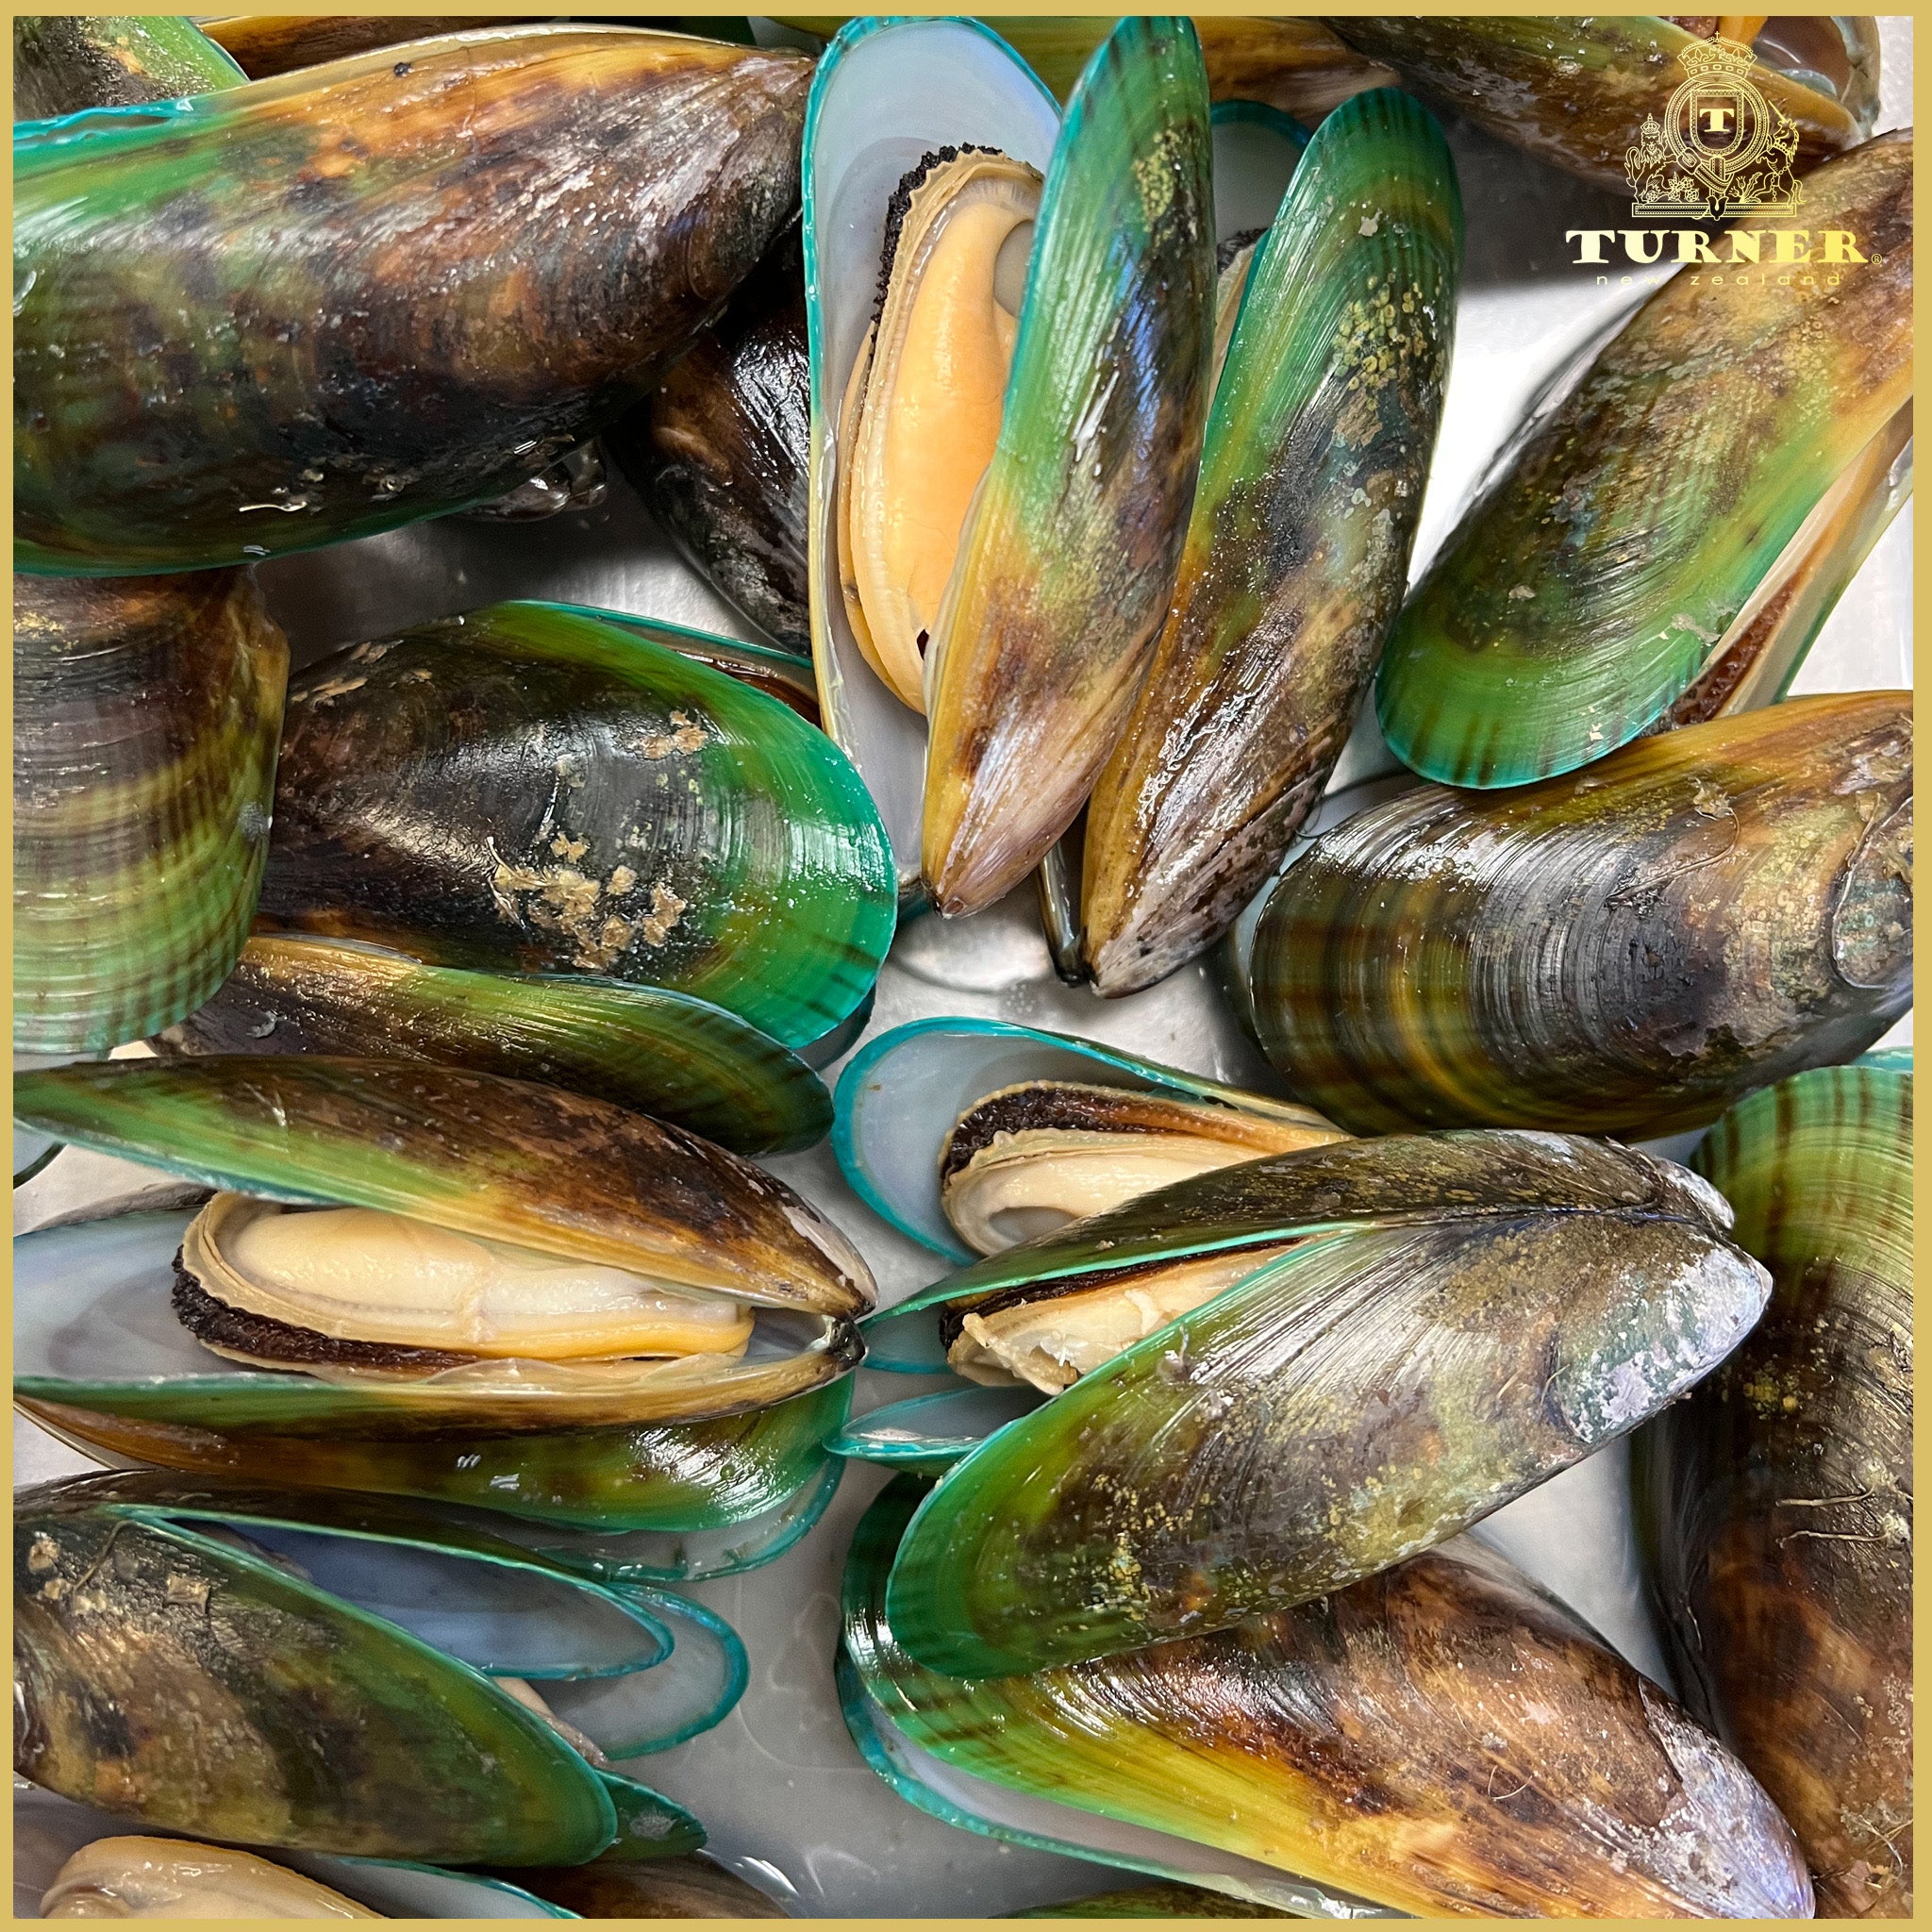 Benefits of Green-Lipped Mussels